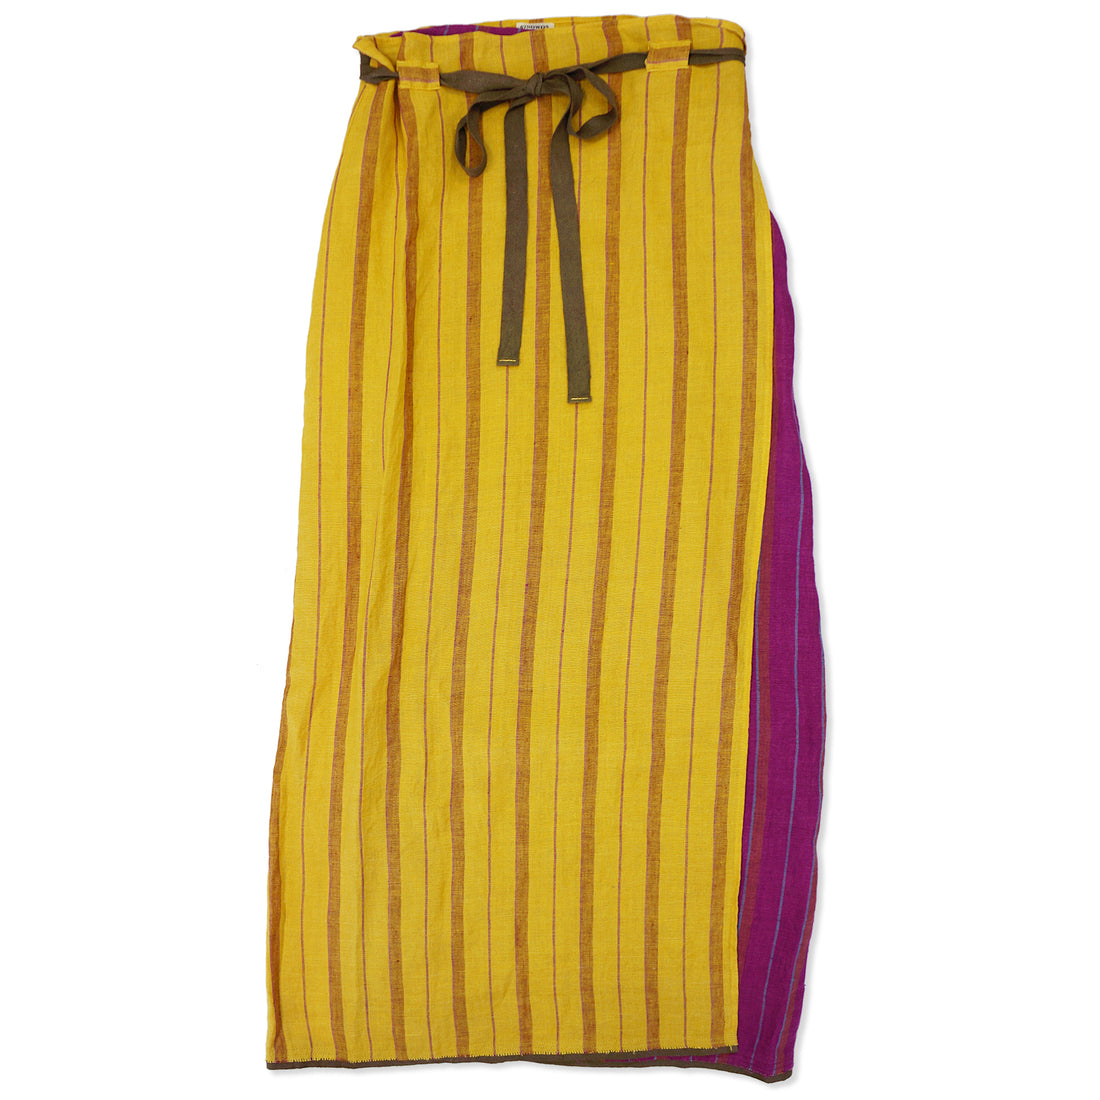 Striped Skirt (67nowos)